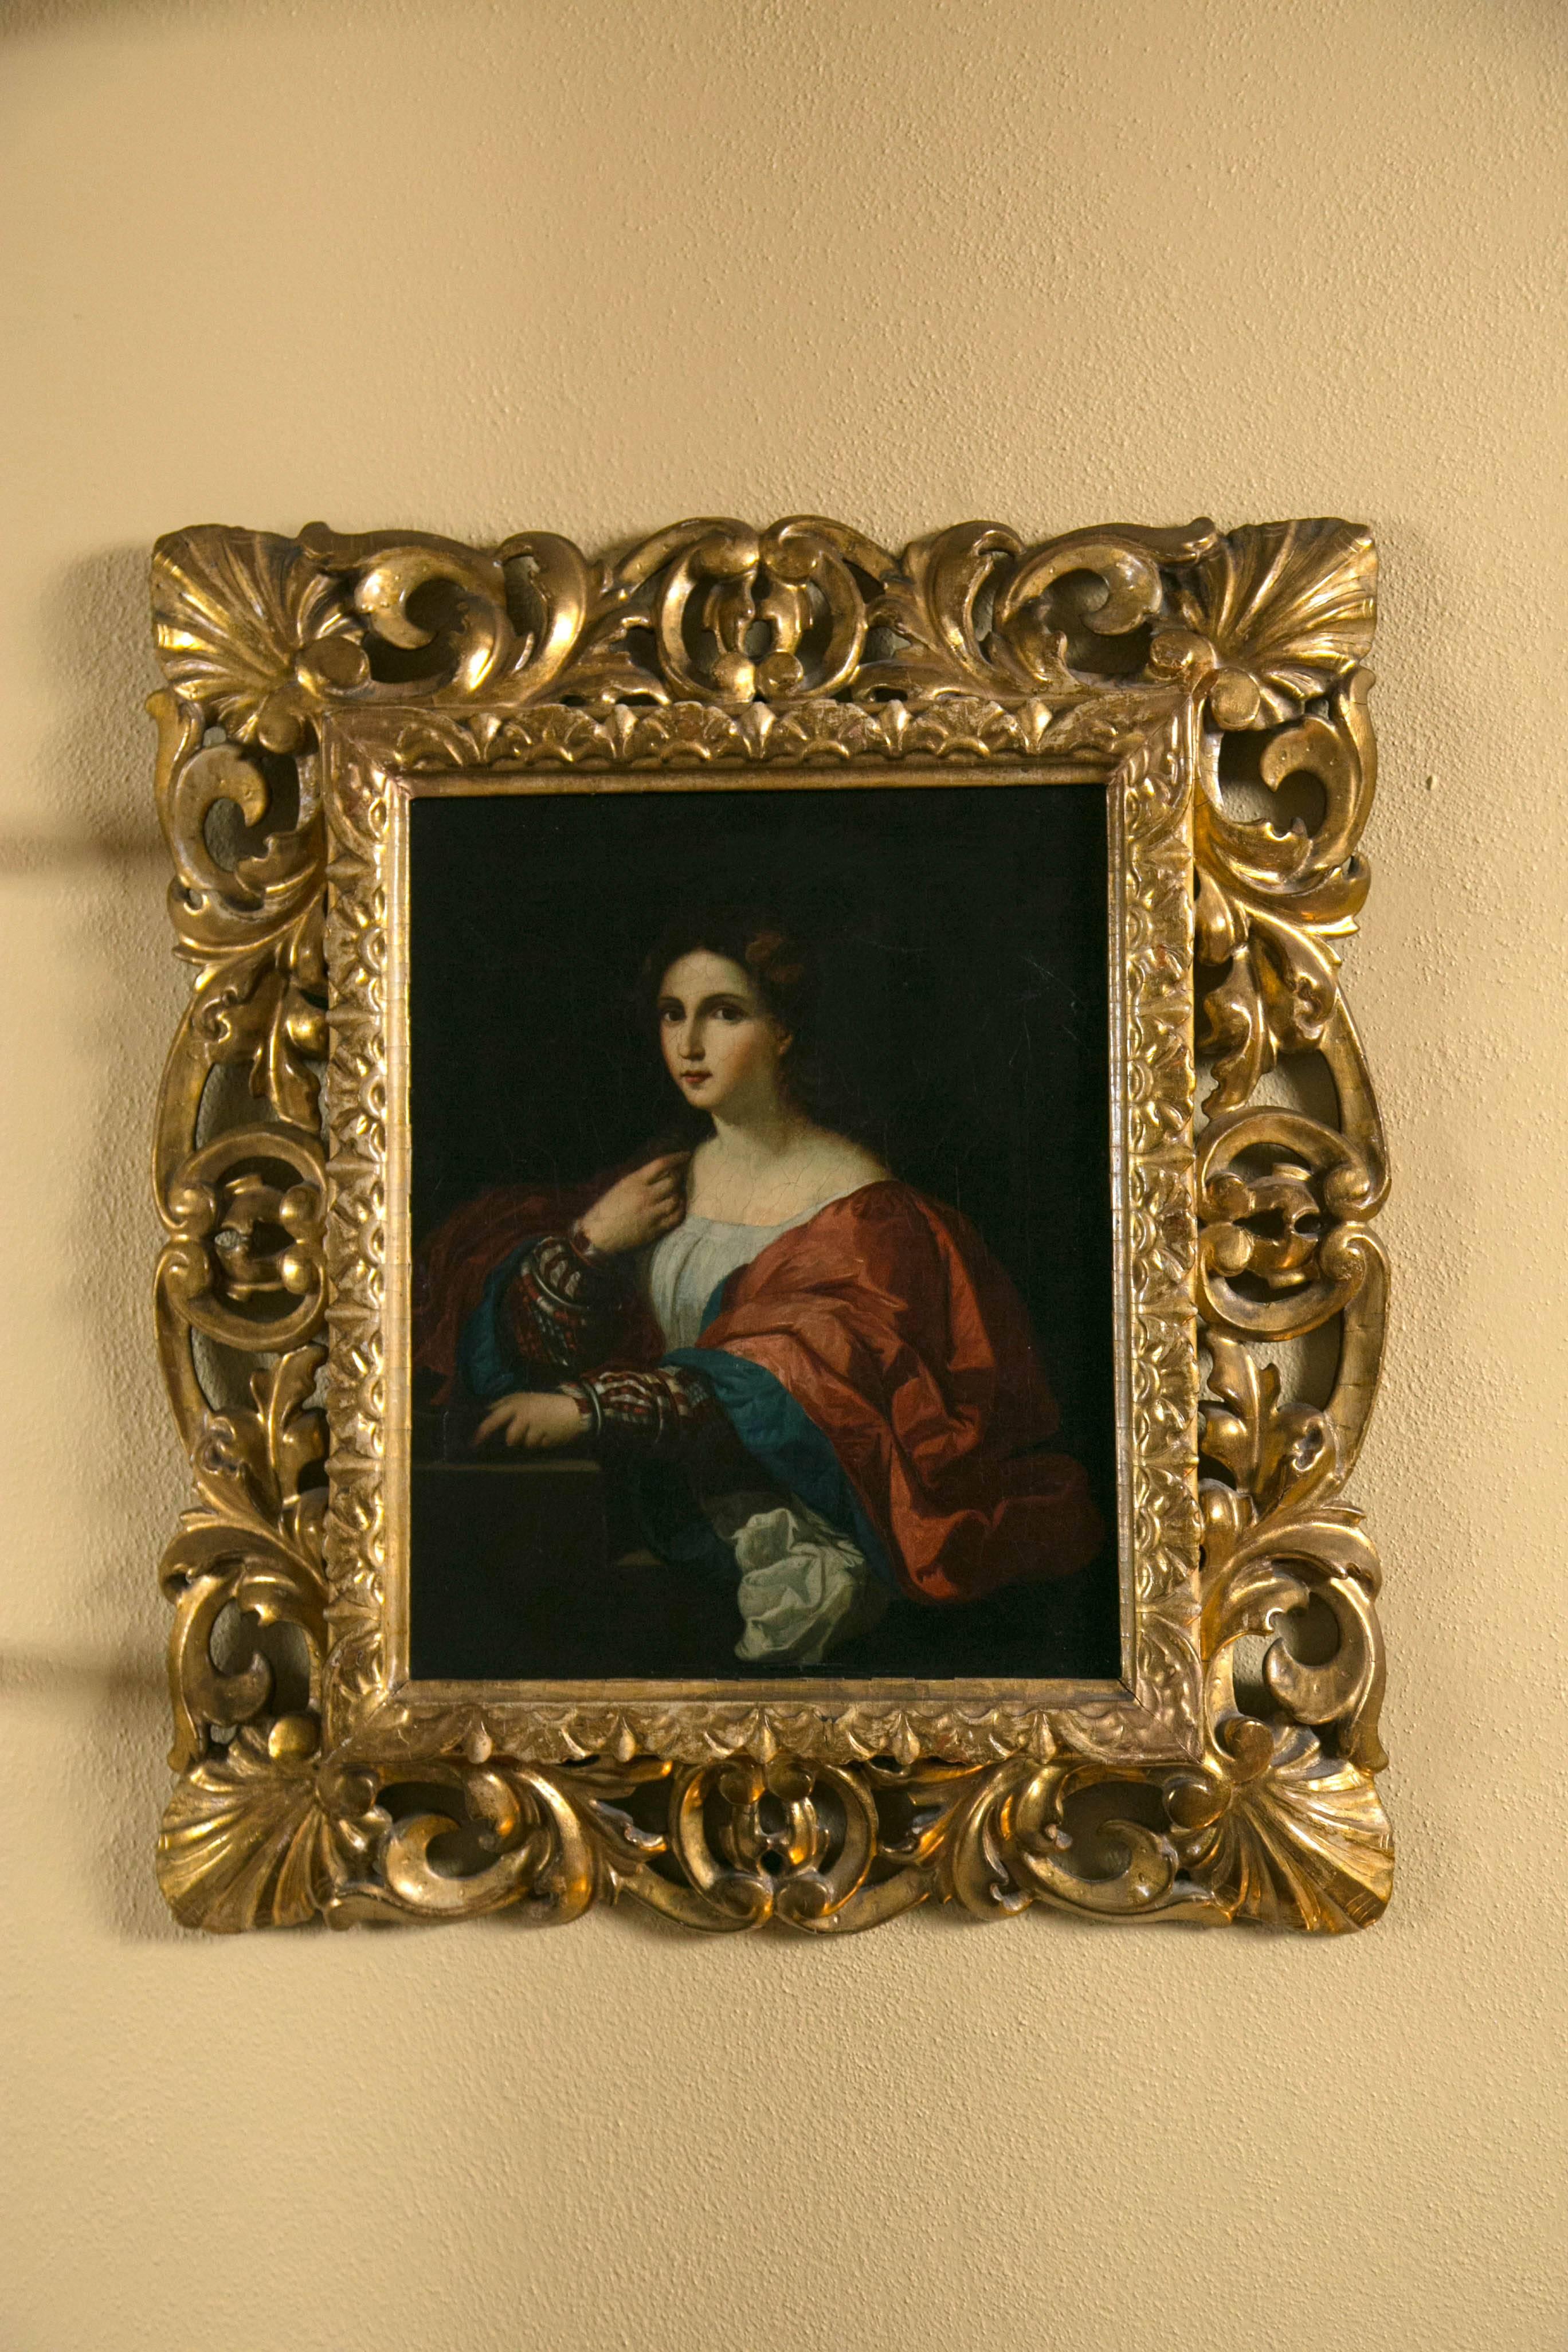 This unsigned portrait of a young noble woman is executed in the style of Renaissance Venetian painter Palma il Vecchio.